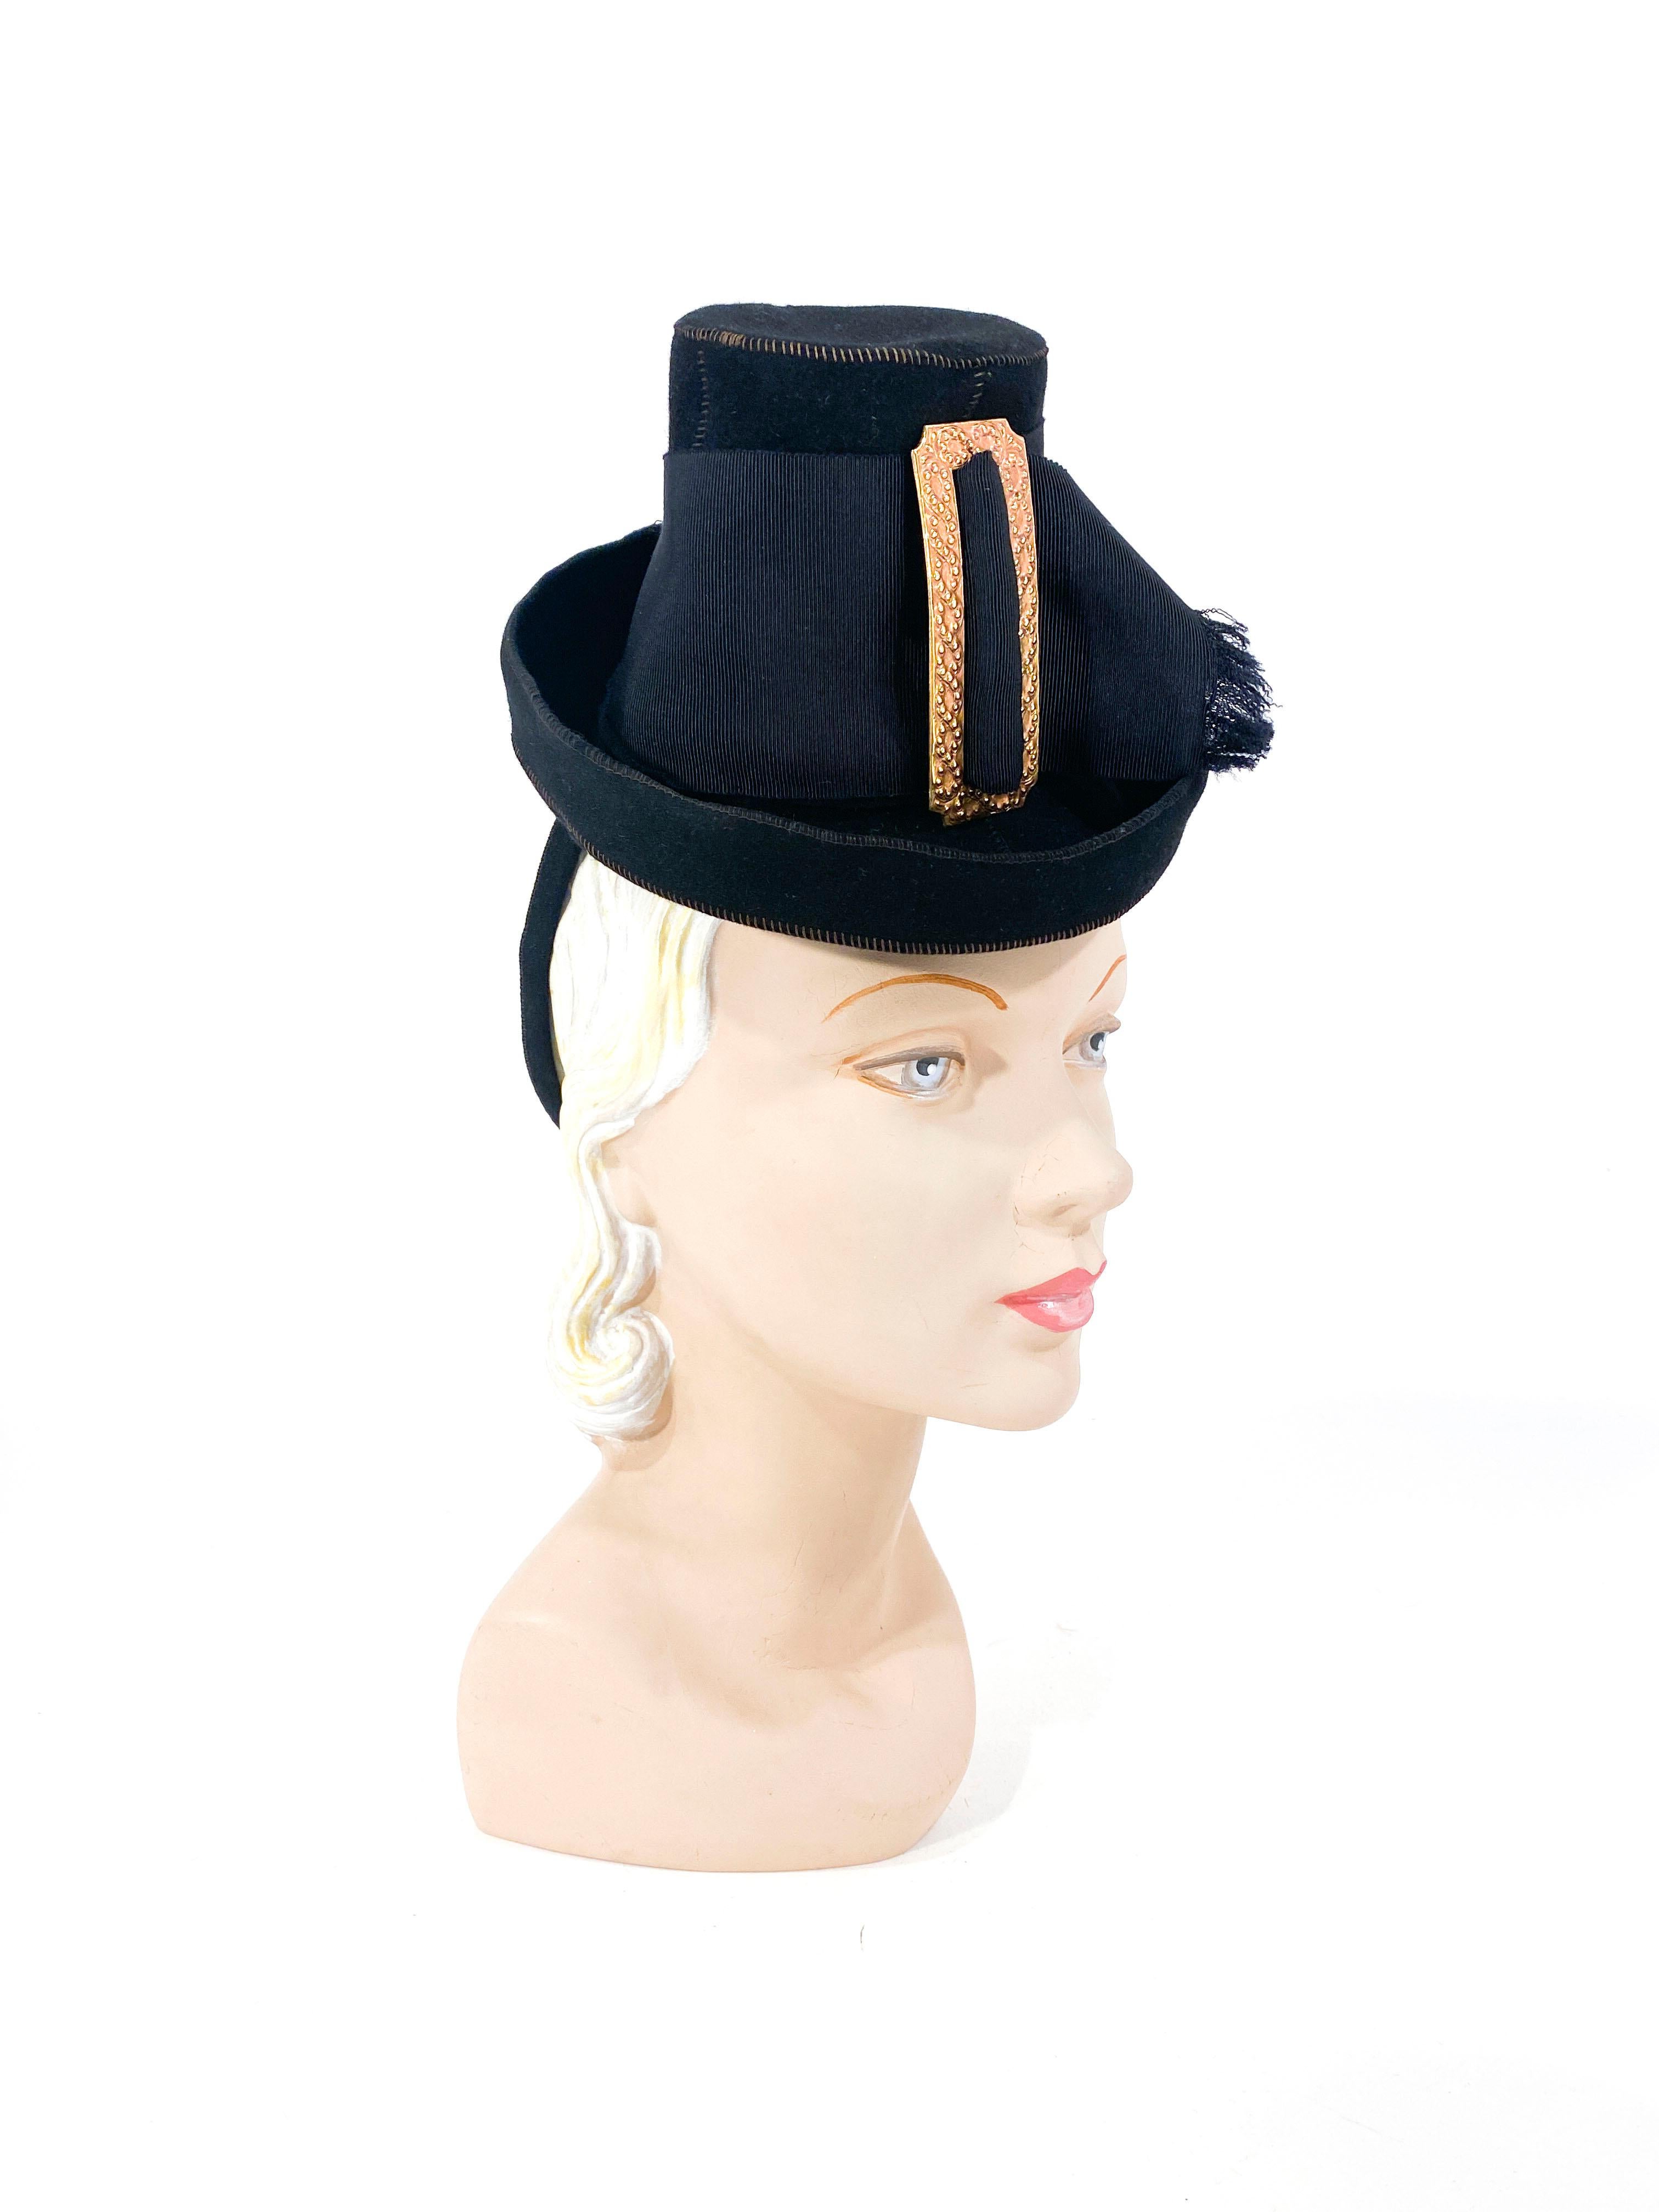 Late 1930s black fur felt toy pilgrim hat with a wide grosgrain ribbon band and large decorative brass buckle. The structured security ring is covered in matching black fur felt and fixes the hat to the head.